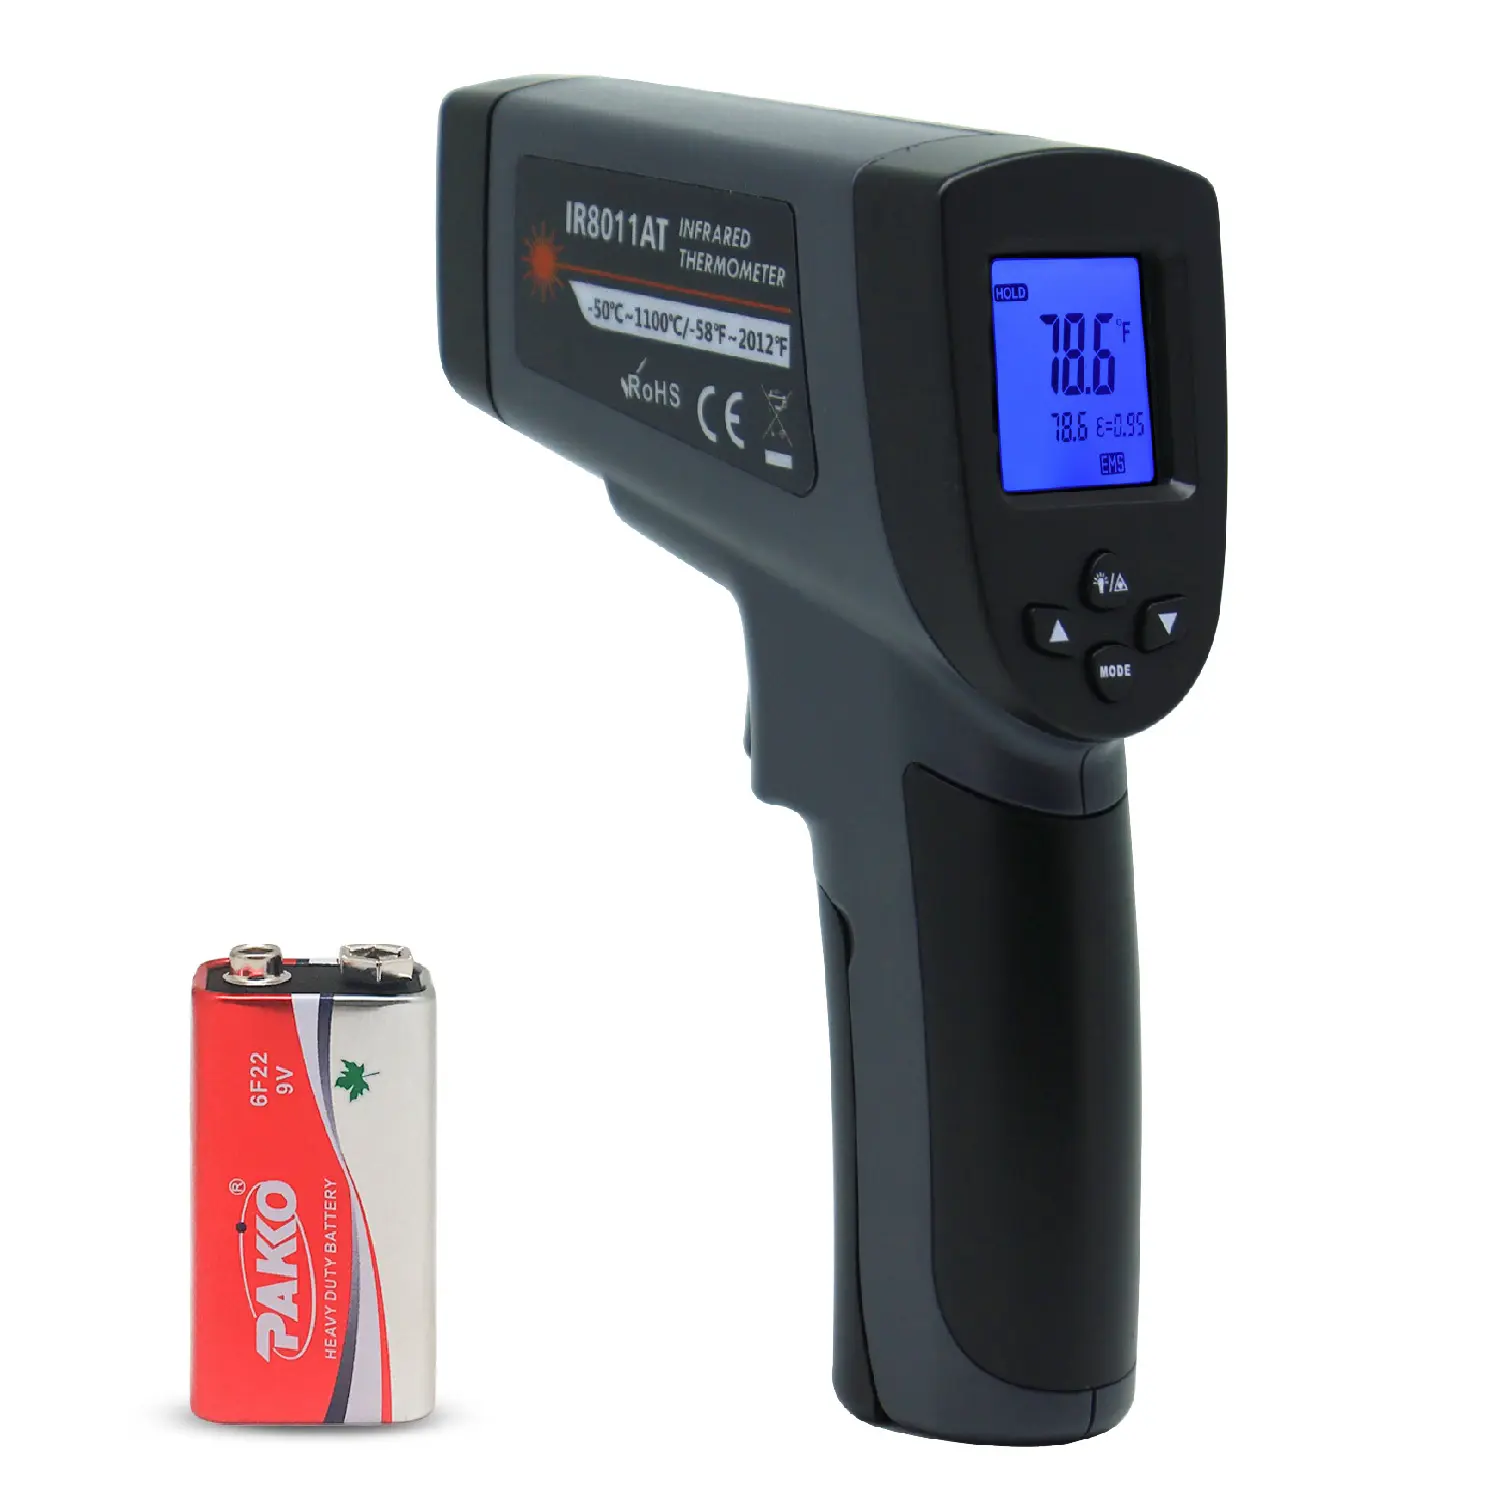 IR8011AT handheld industrial infrared thermometer High temperature non-contact infrared thermometer